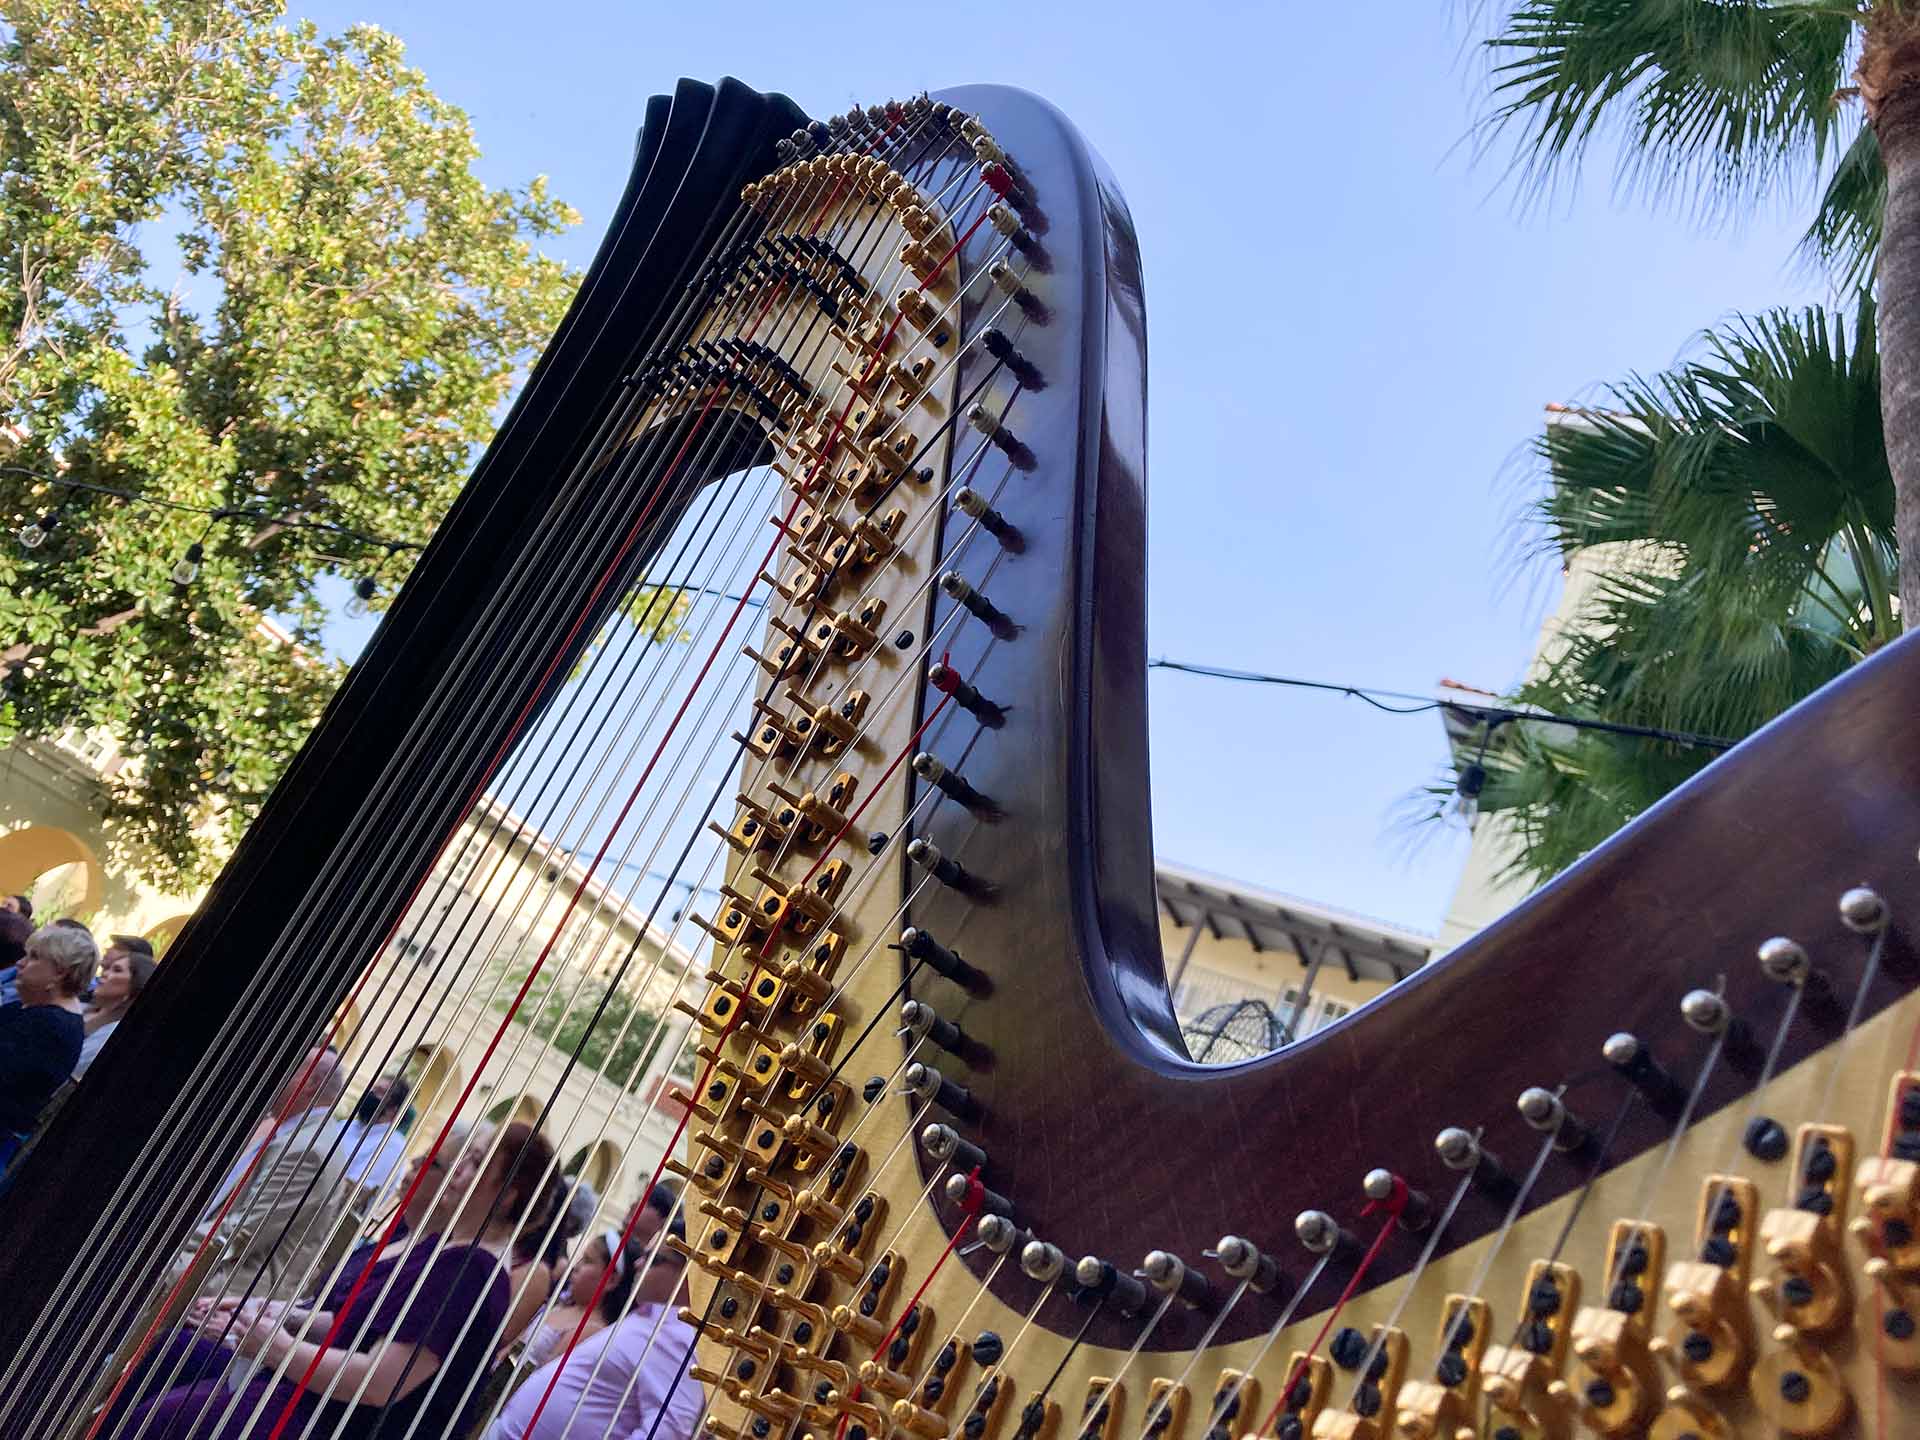 Harp in front of a crowd